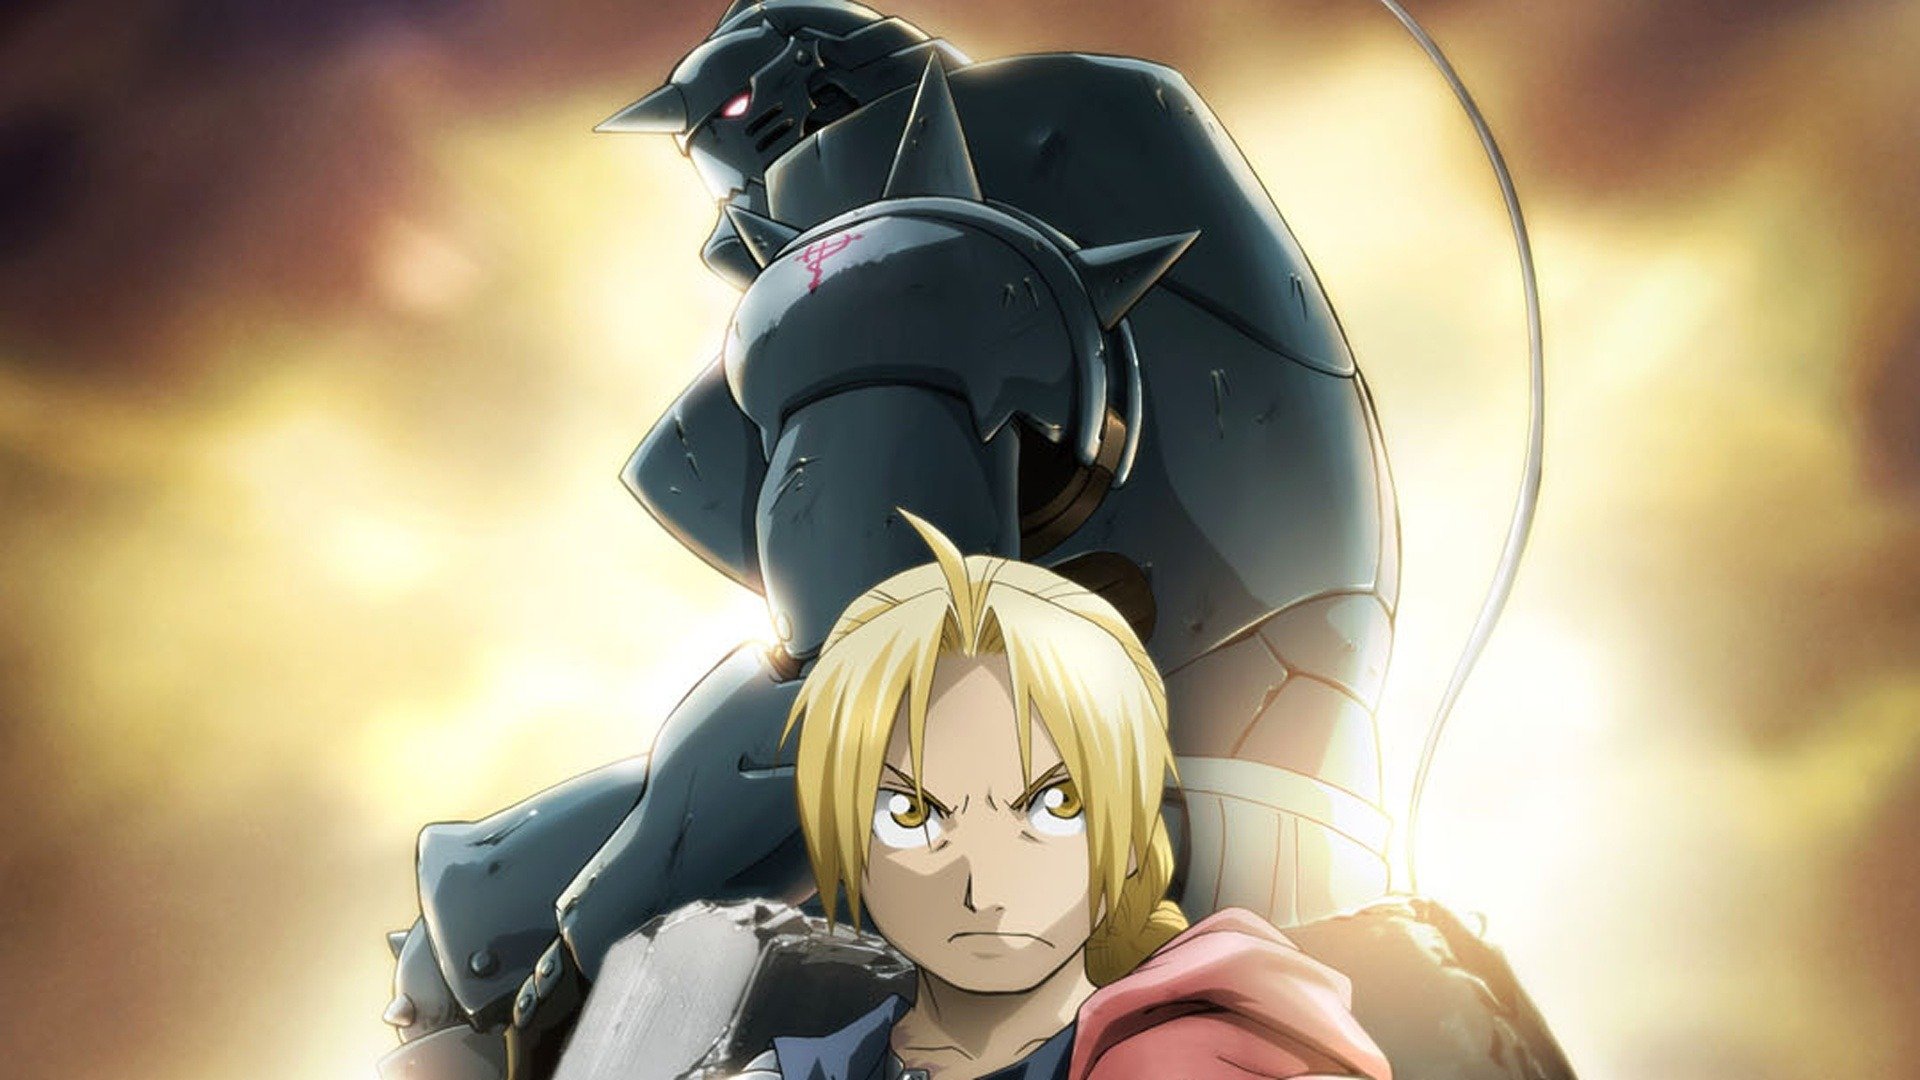 A brief introduction to the world of Fullmetal AlchemistEntertainment News   Firstpost